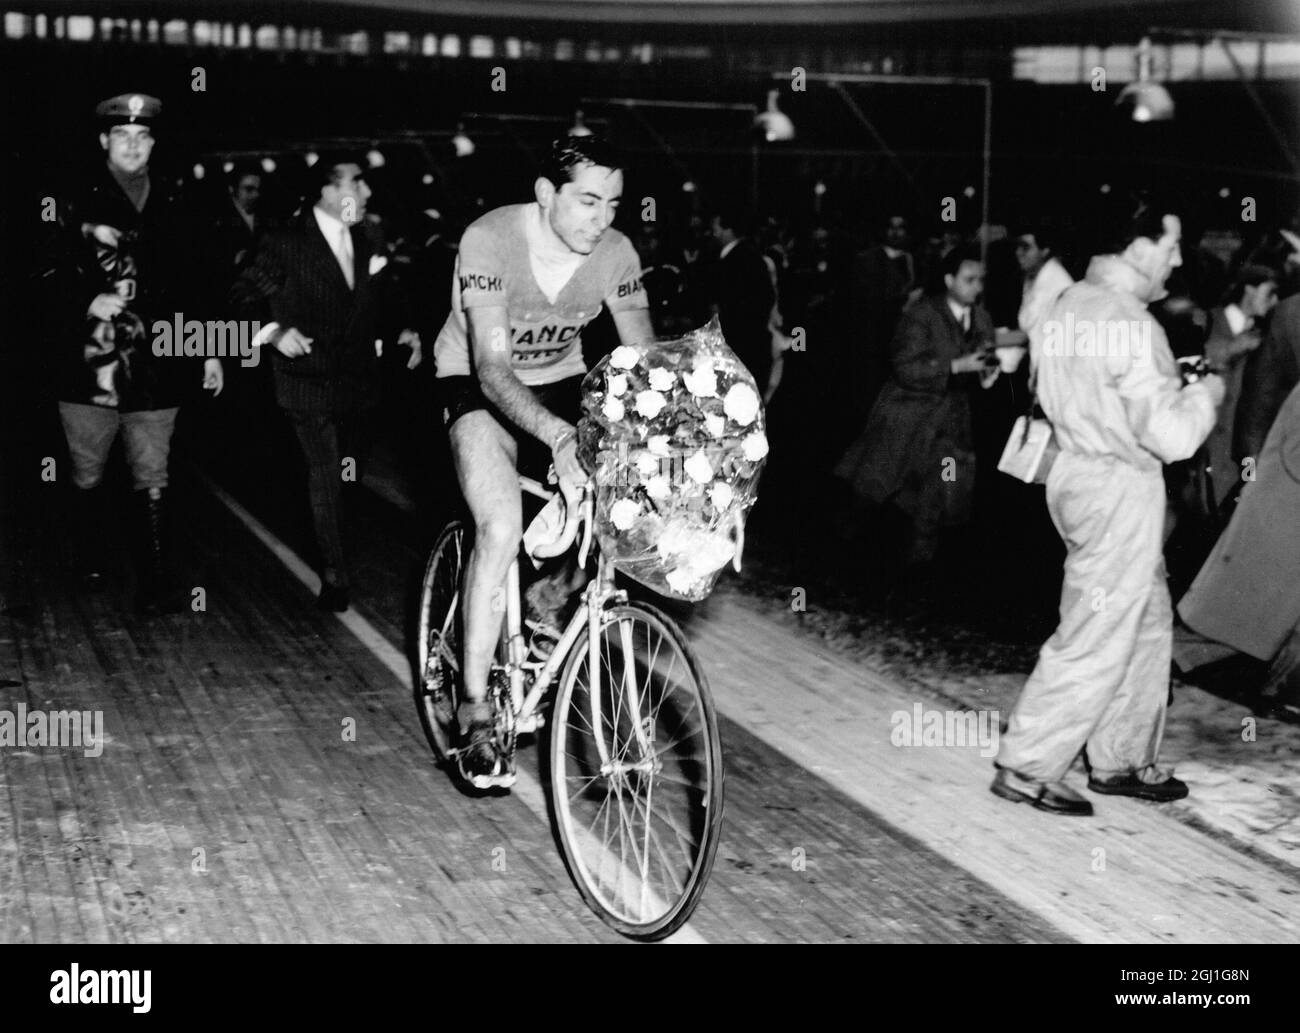 Angelo Fausto Coppi making a tour of honour after winning the 222 kilometer Cycling Tour of Lombardy who covered the distance in 5 hours 51 minutes and 33 seconds . 31 October 1954 Stock Photo